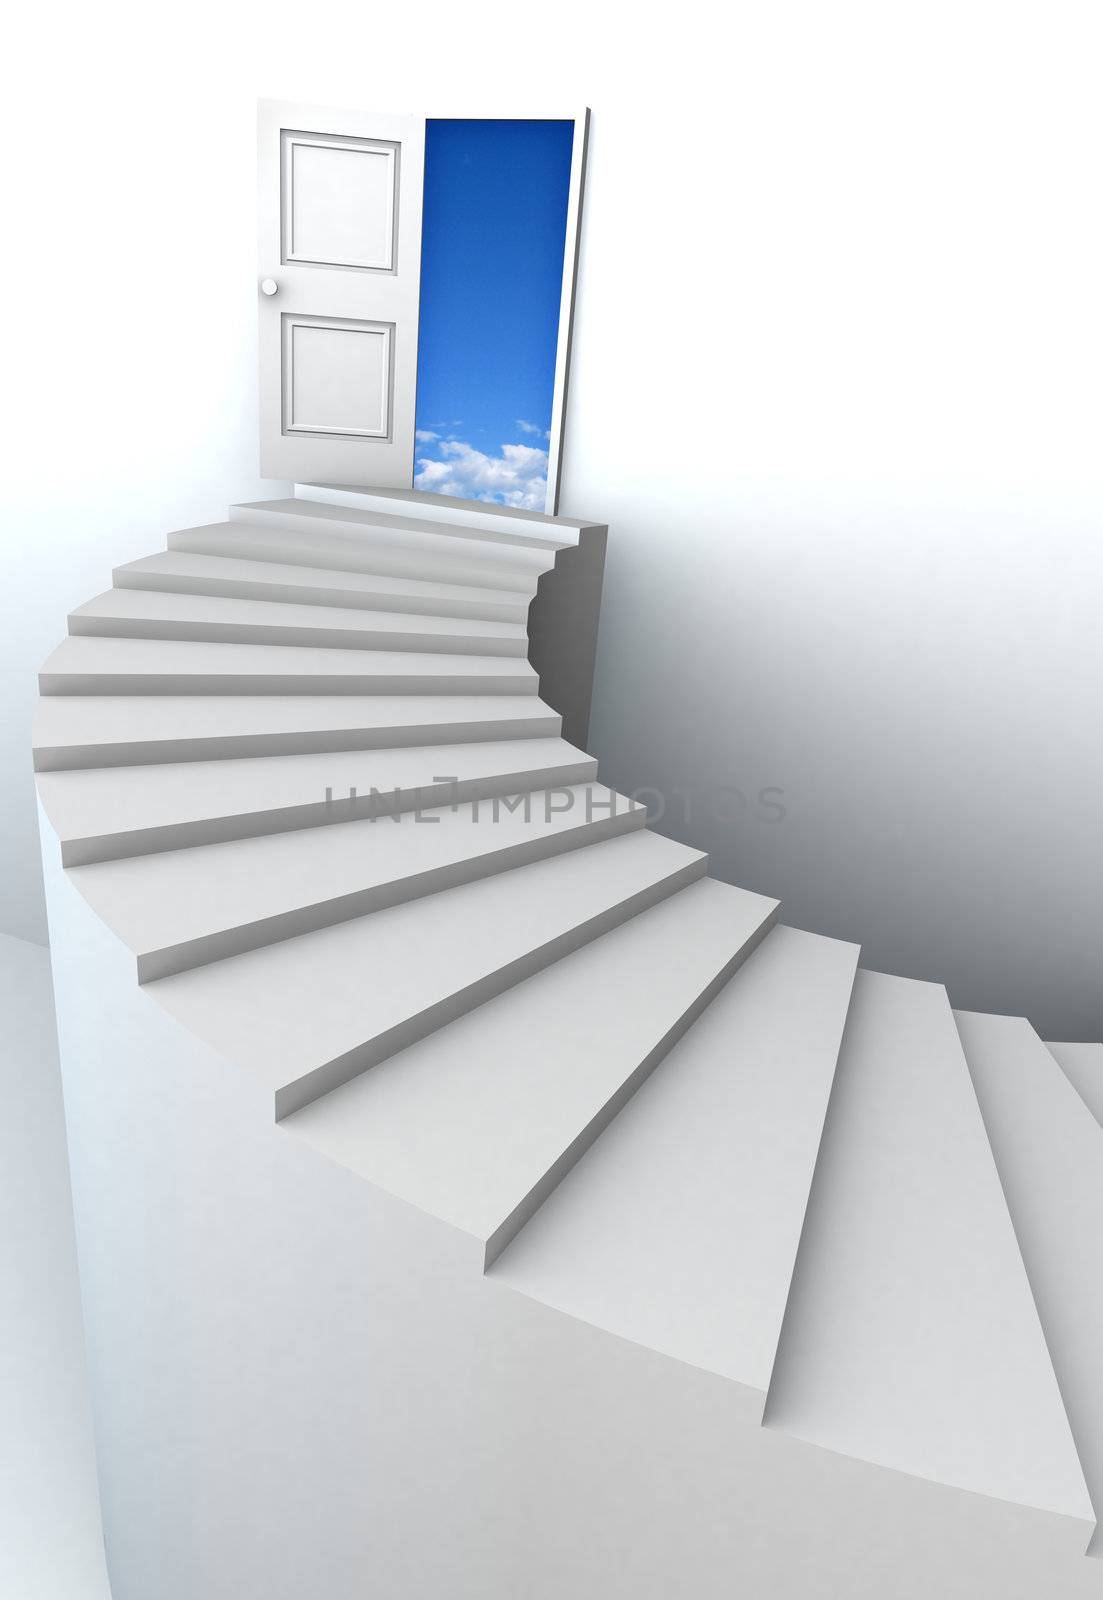 Open door to business success with 3d stairs. Included clipping path in the door, so you can easily cut it out and place your own subject.